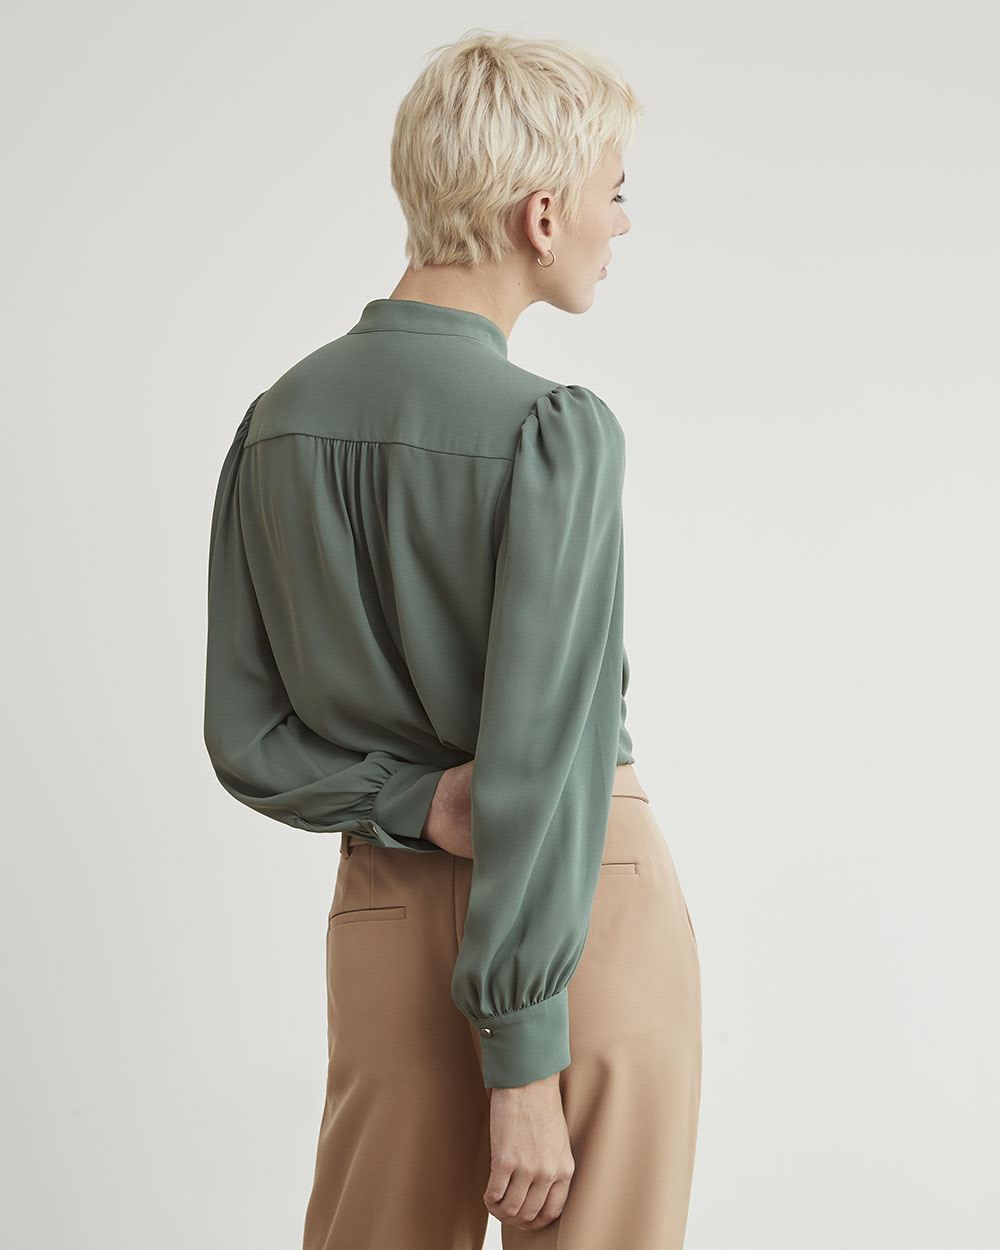 Long-Sleeve Buttoned-Down Silky Crepe Blouse